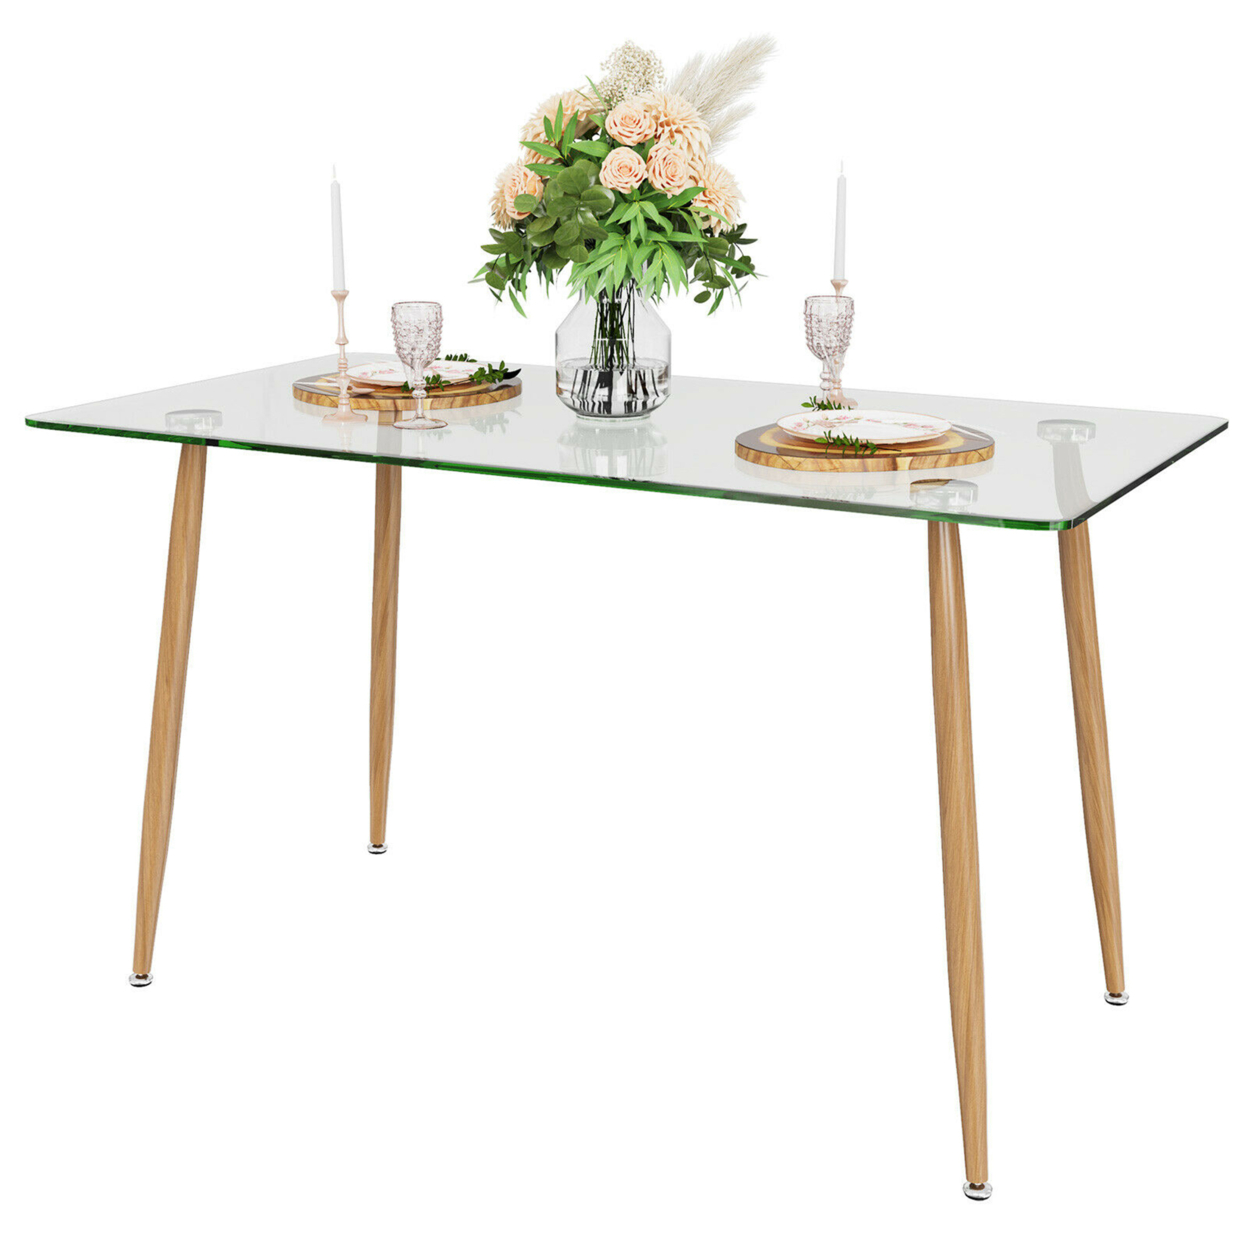 Modern Glass Dining Table Rectangular Dining Room Table W/Metal Legs For Kitchen